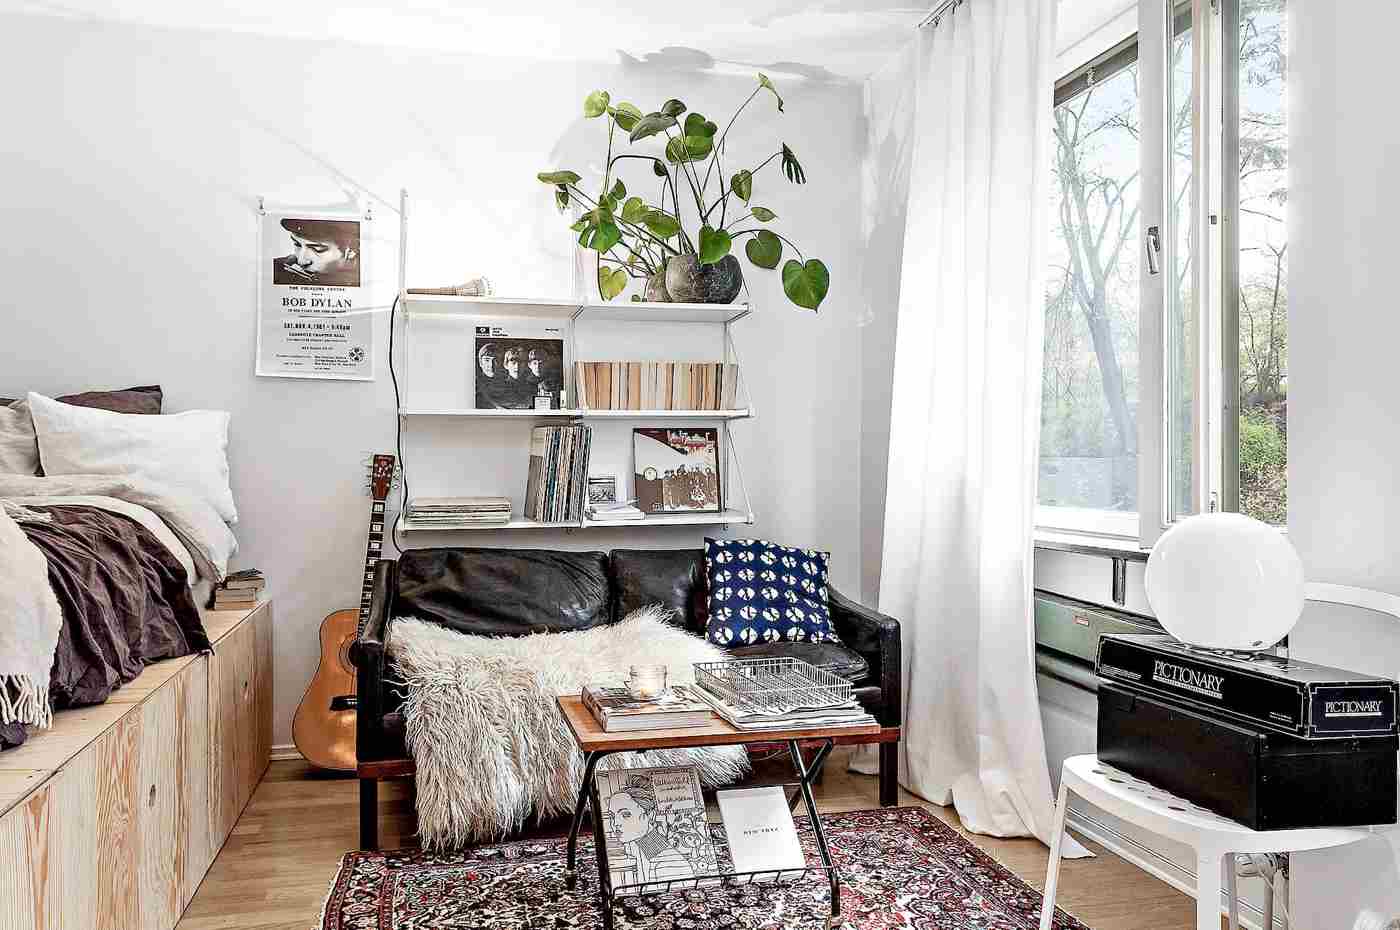 Living room bedroom combine interior design leather coach bed with storage space Vintage Kilim Wall Shelf White Hippie Single Room